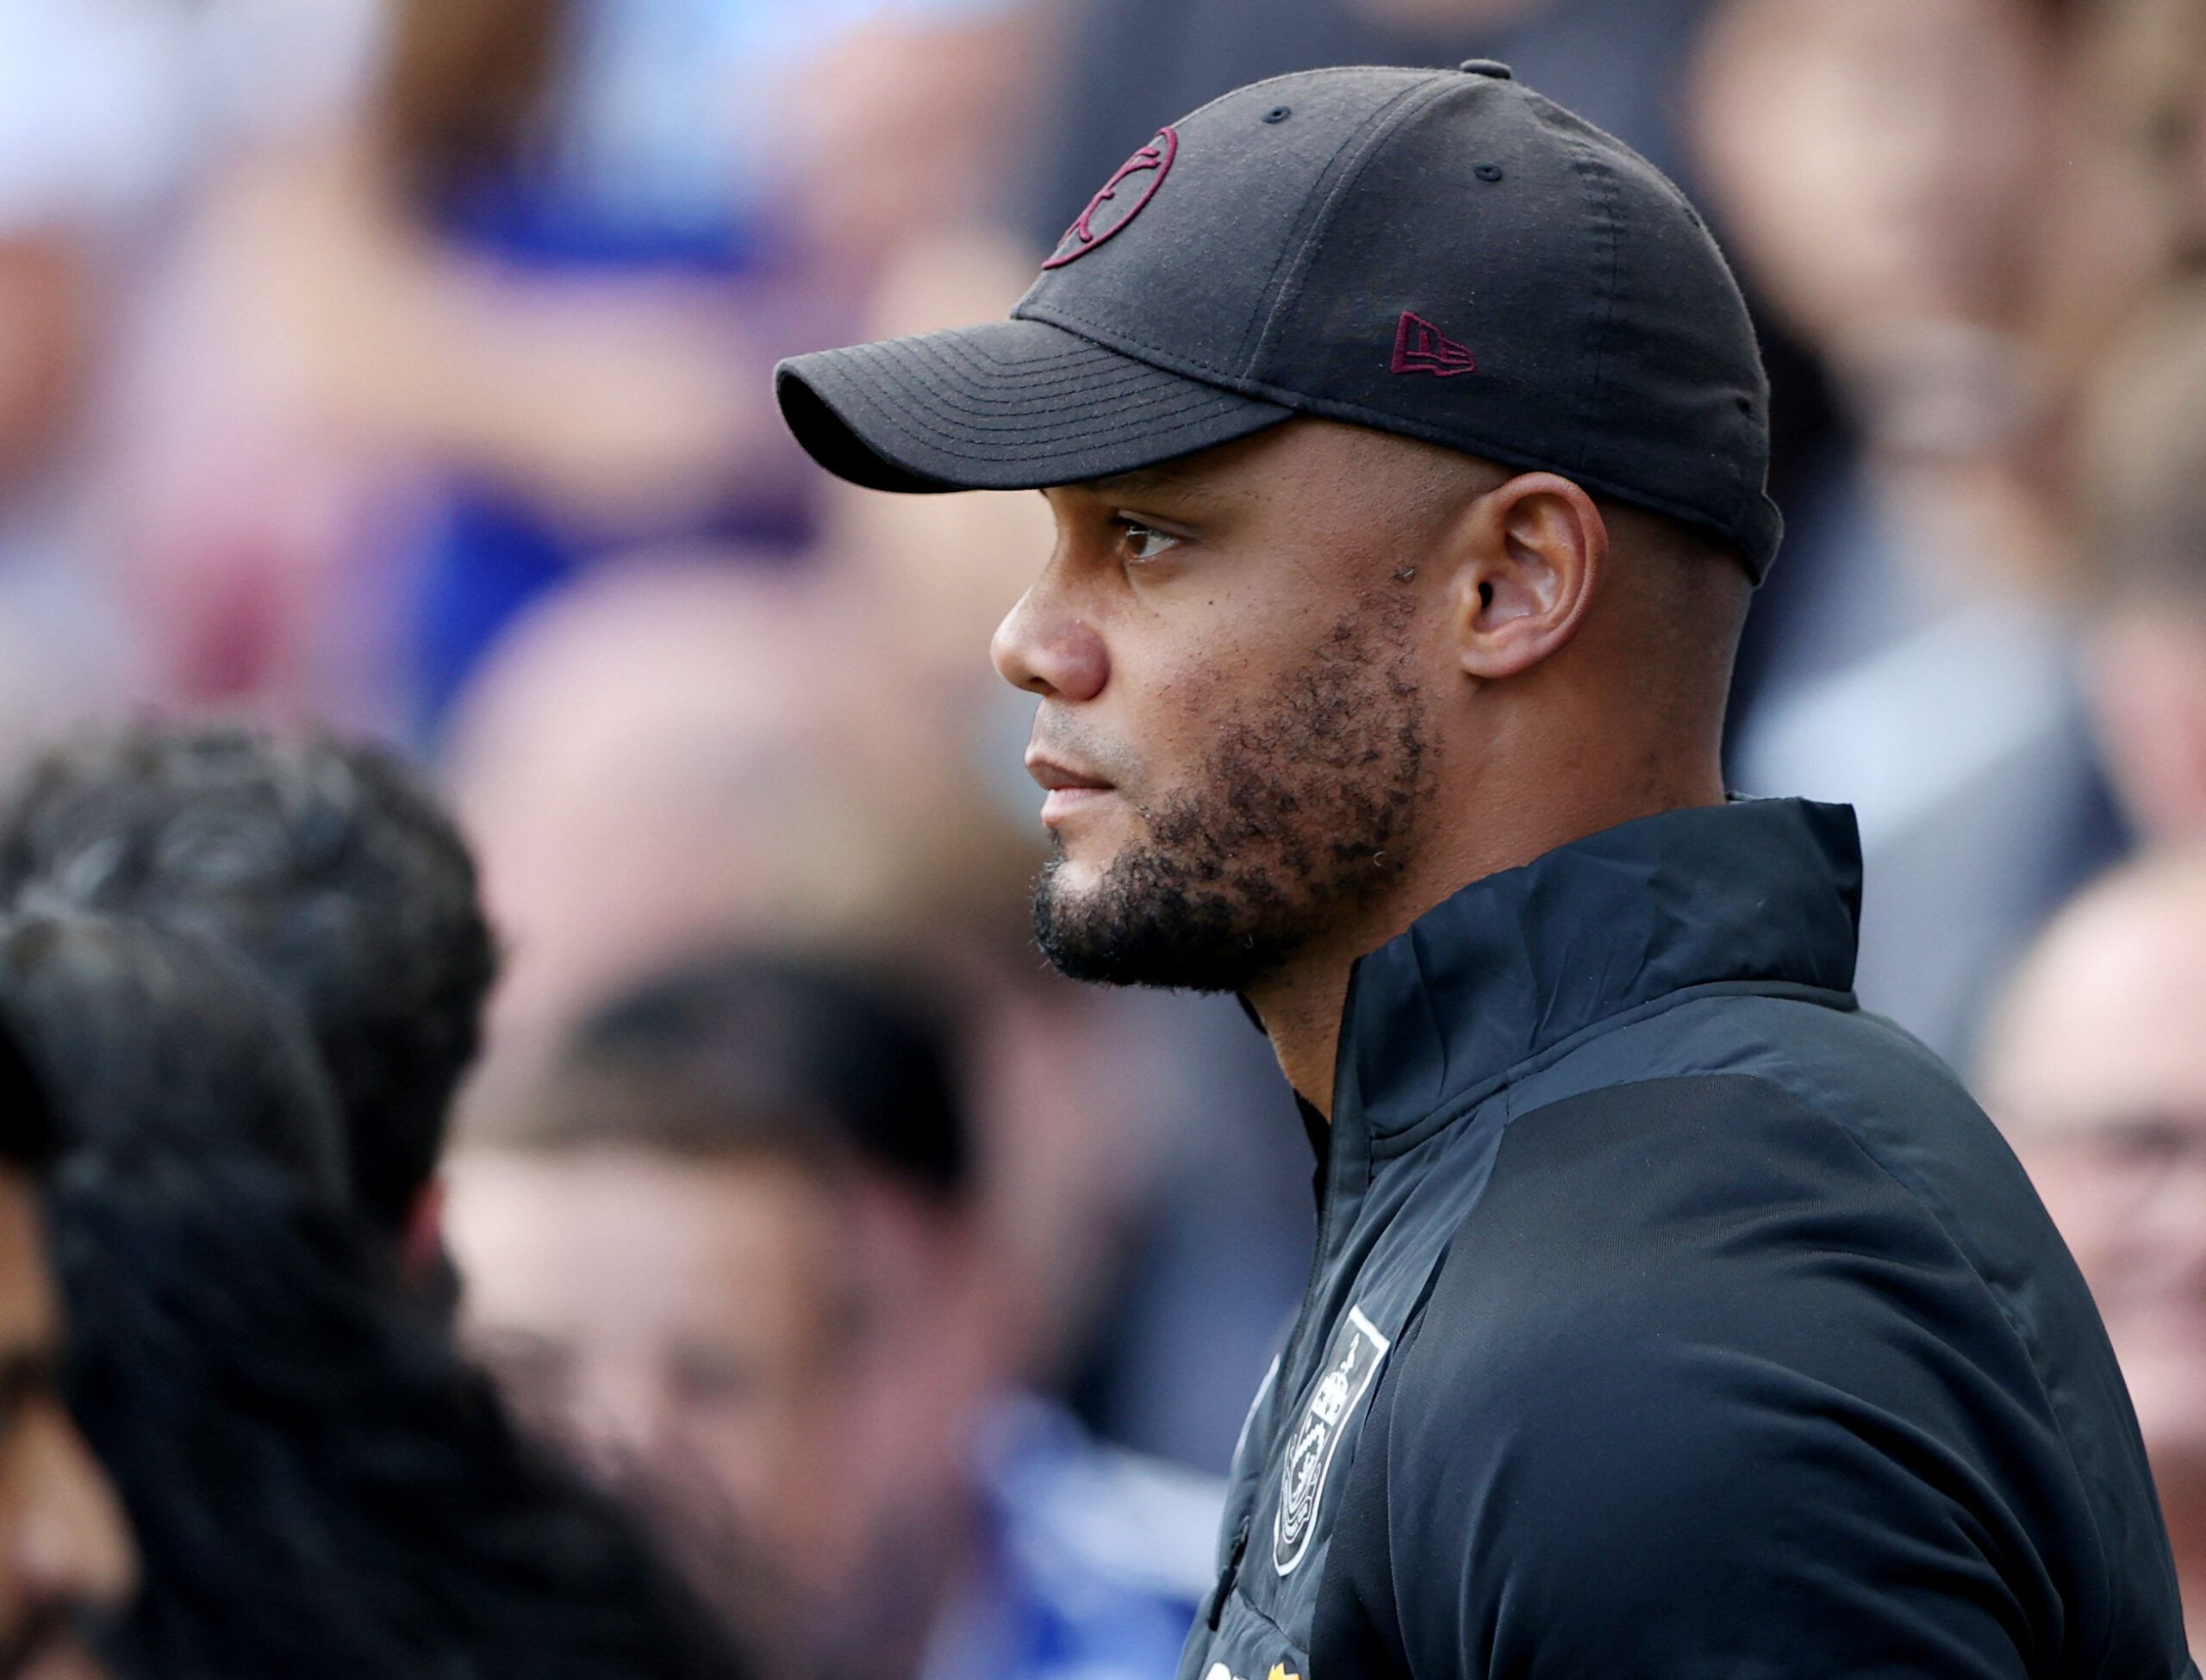 Soccer Football - Championship - Wigan Athletic v Burnley - DW Stadium, Wigan, Britain - August 27, 2022 Burnley Manager Vincent Kompany reacts  Action Images/Molly Darlington  EDITORIAL USE ONLY. No use with unauthorized audio, video, data, fixture lists, club/league logos or 